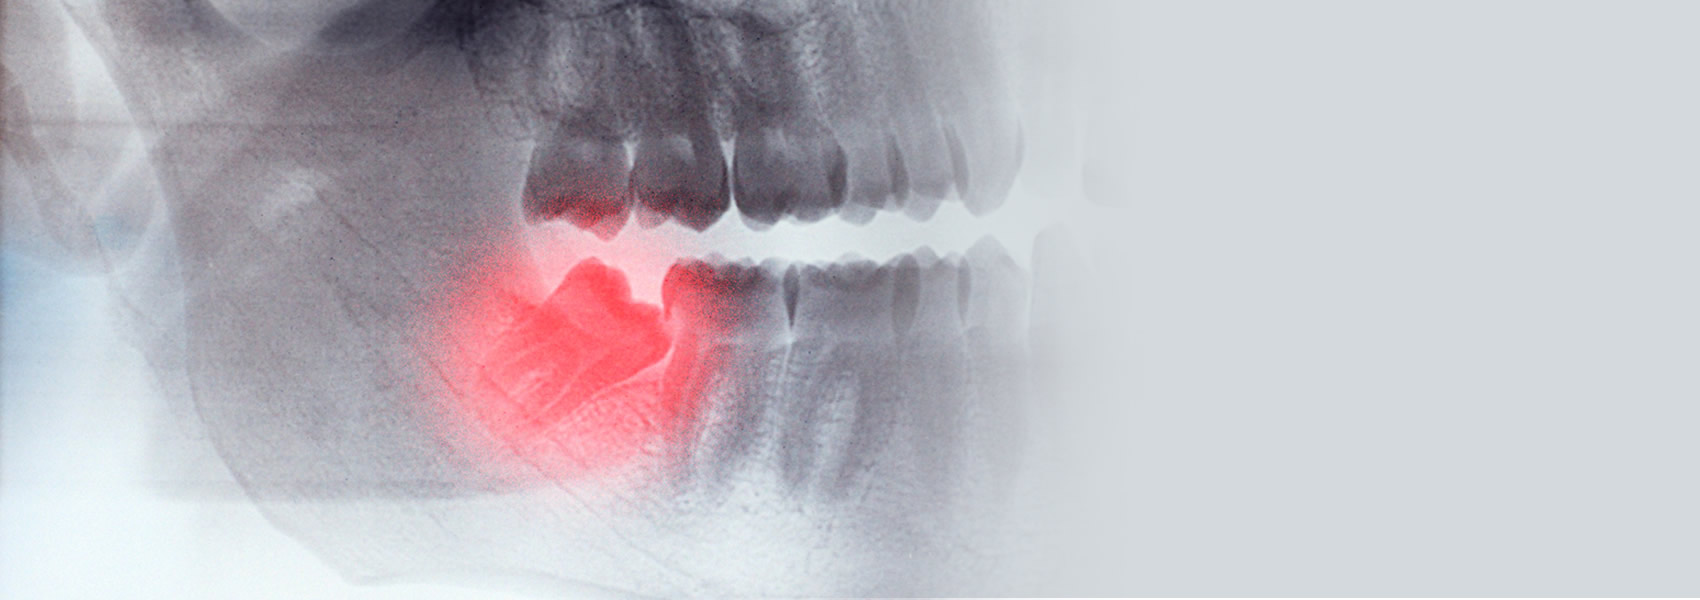 wisdom teeth removal costs in the UK